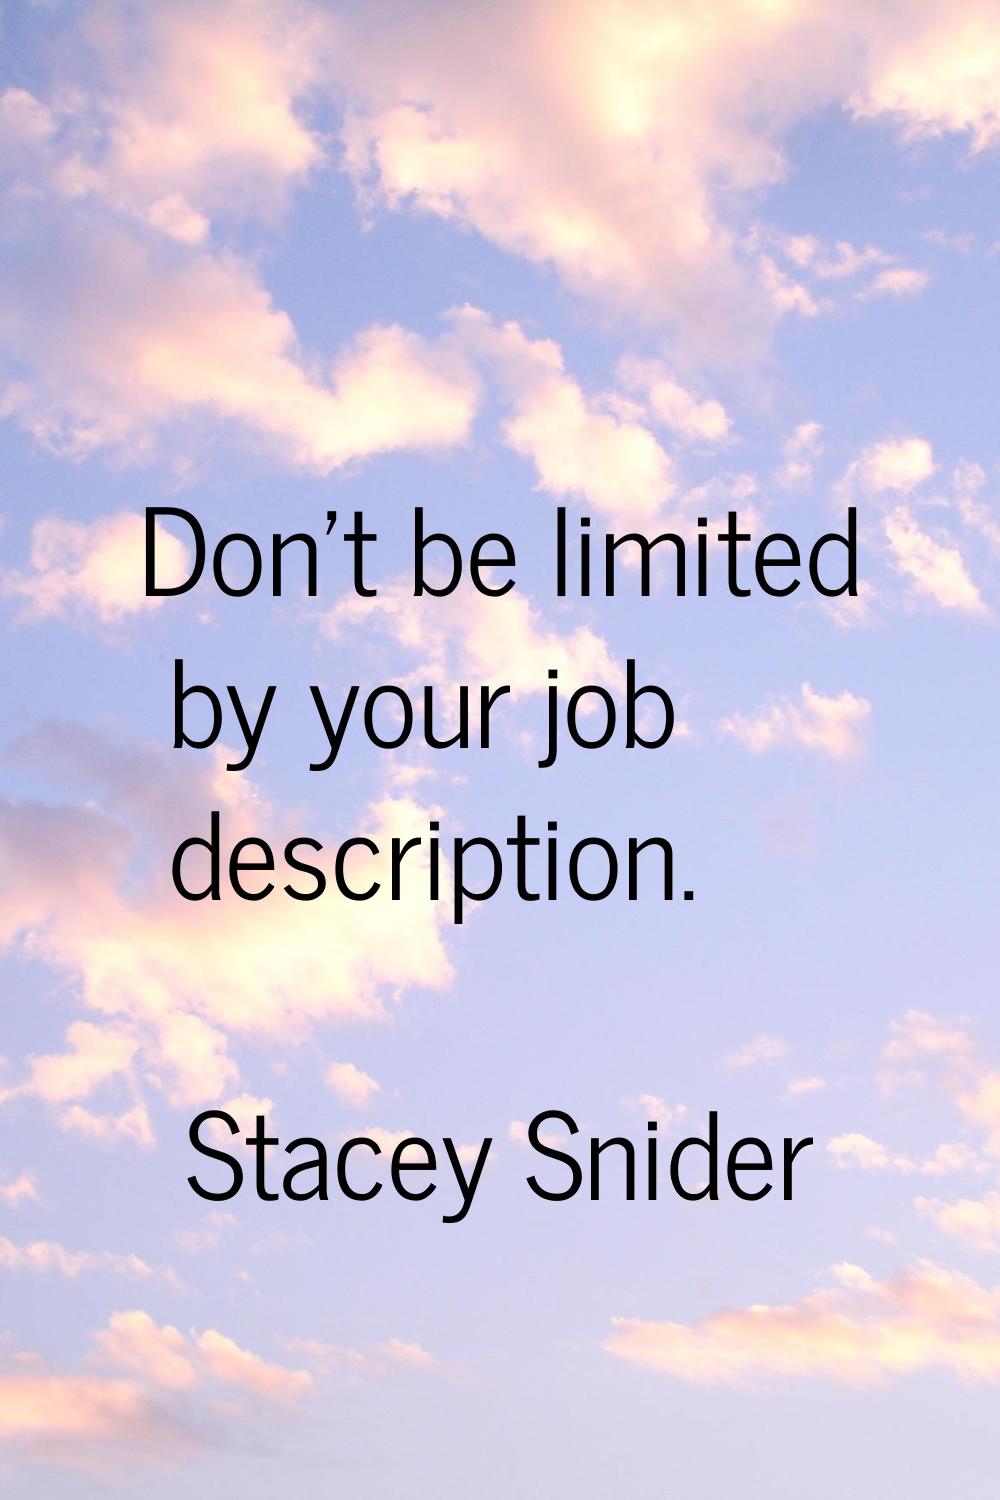 Don't be limited by your job description.